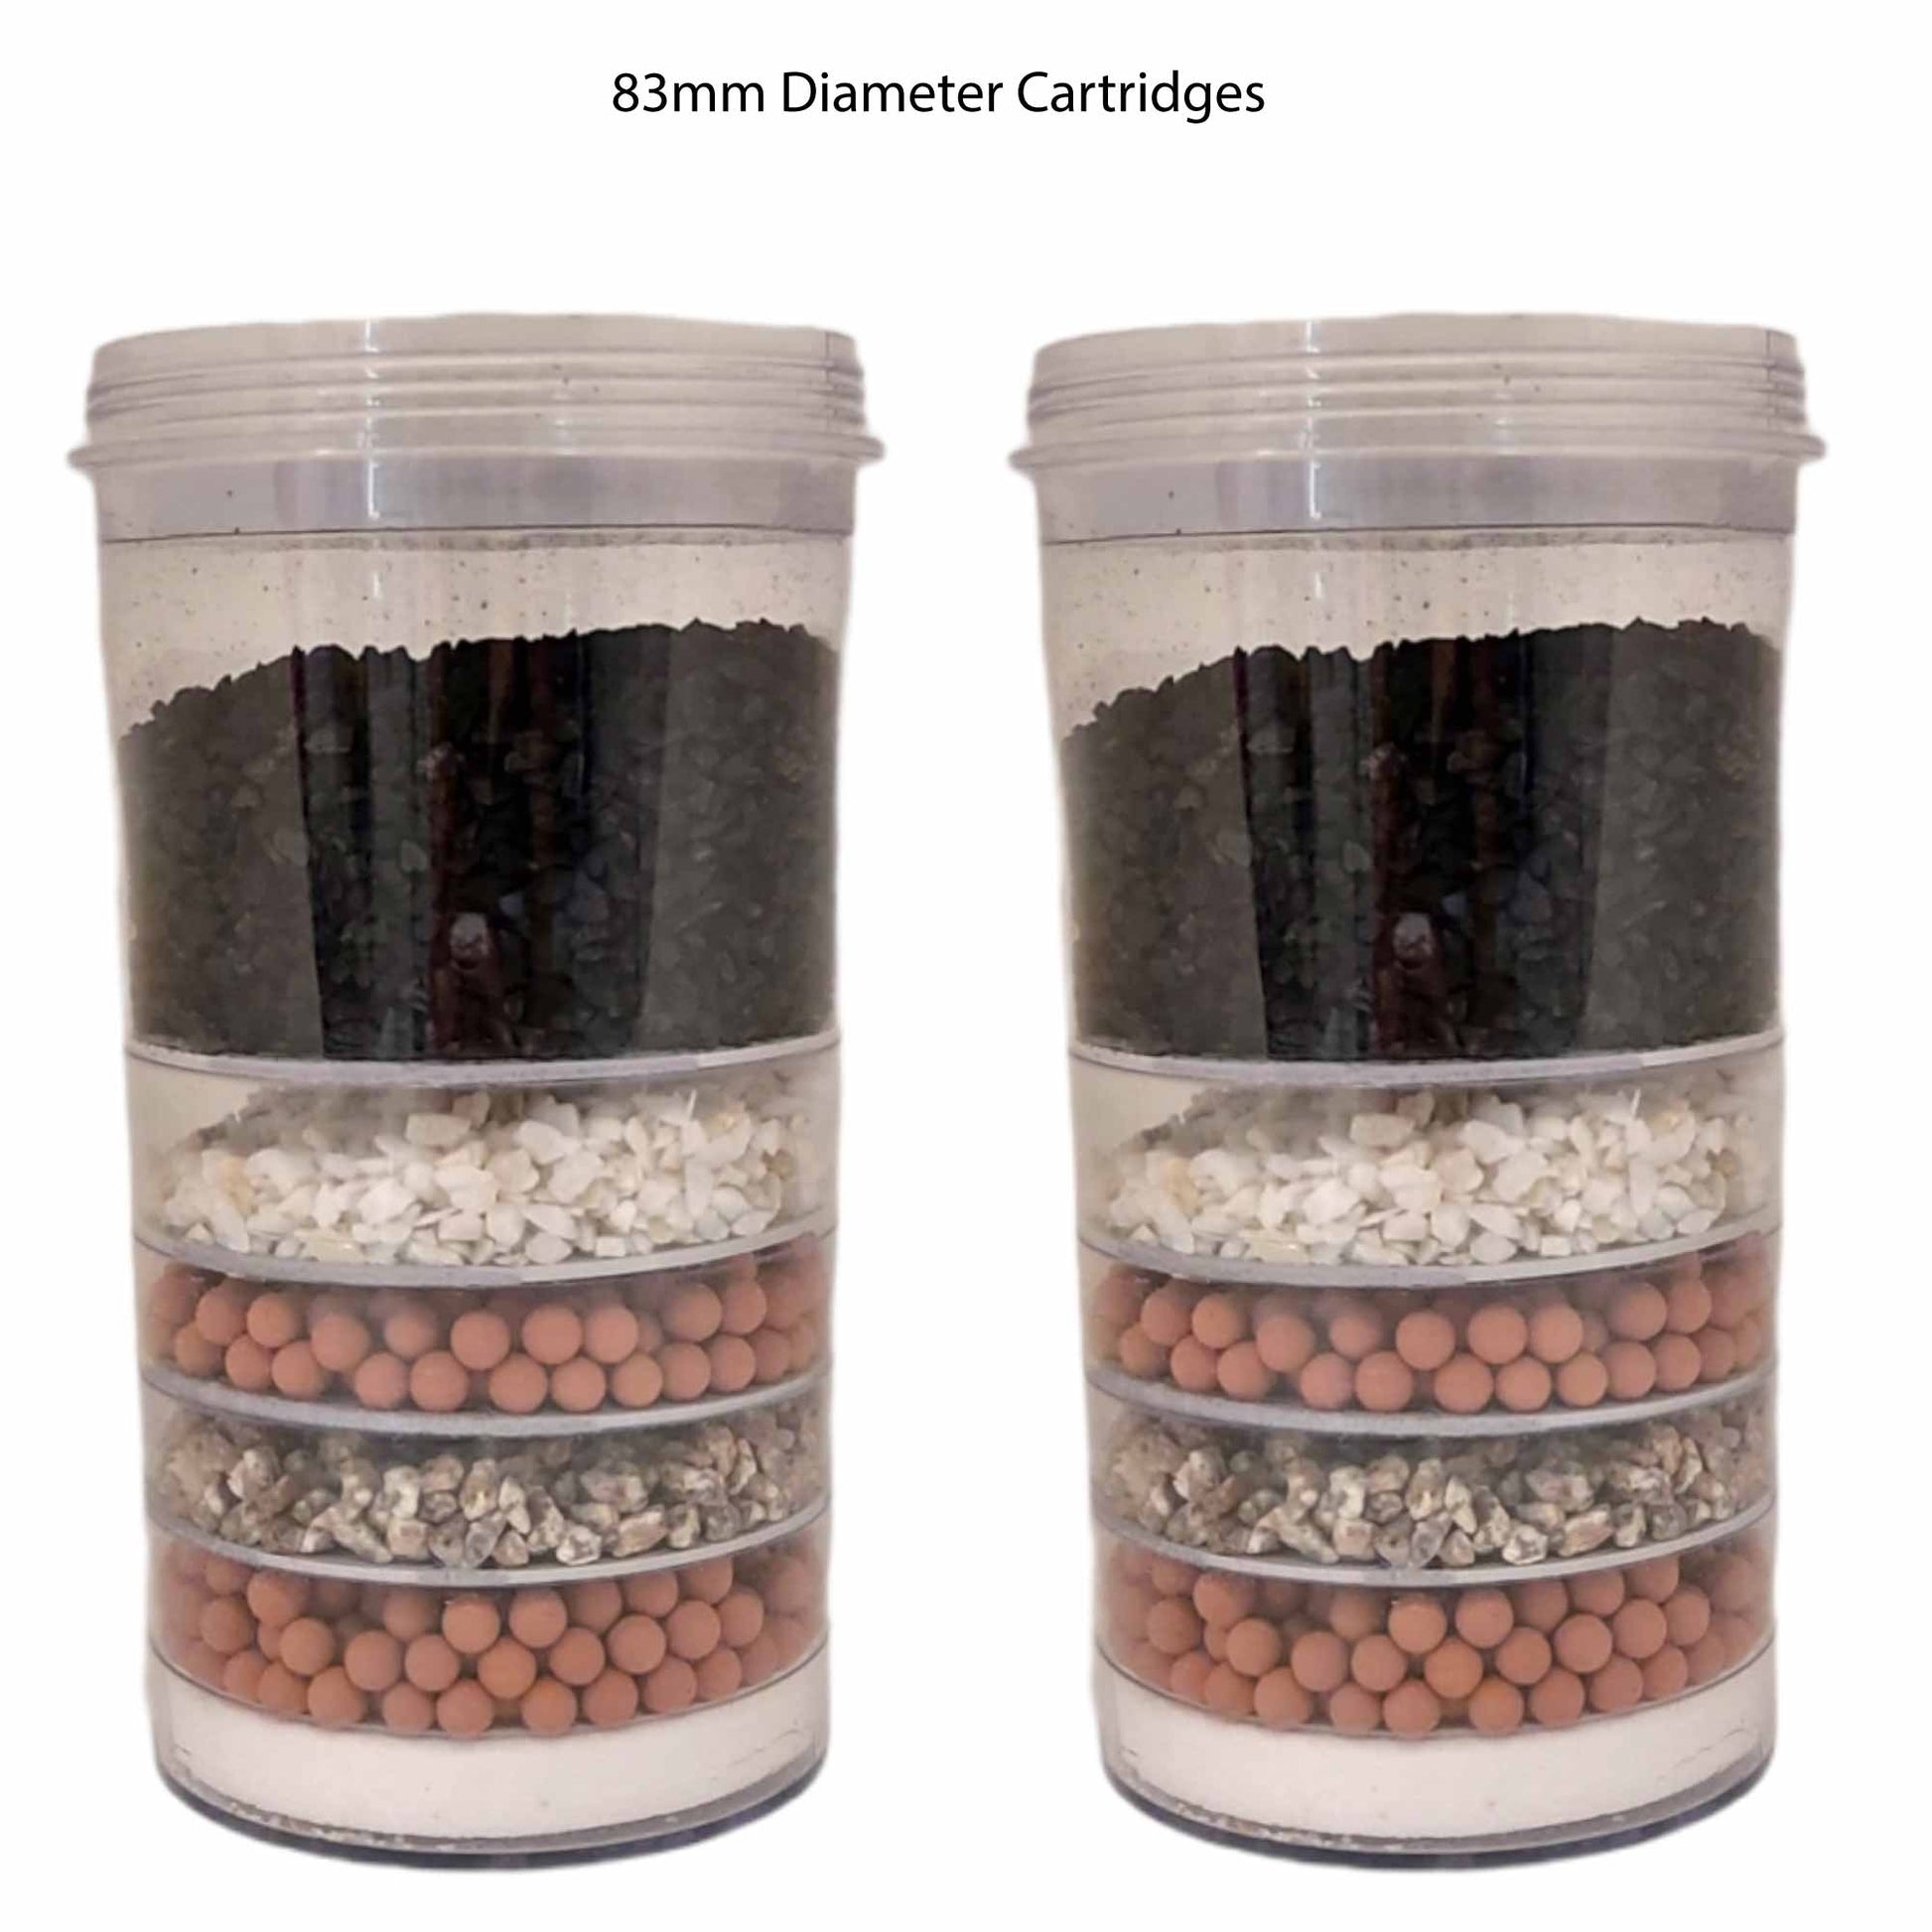 2x 5 Stage Water Filter Replacement - Mineral Carbon Cartridge -8 Stage Purifier